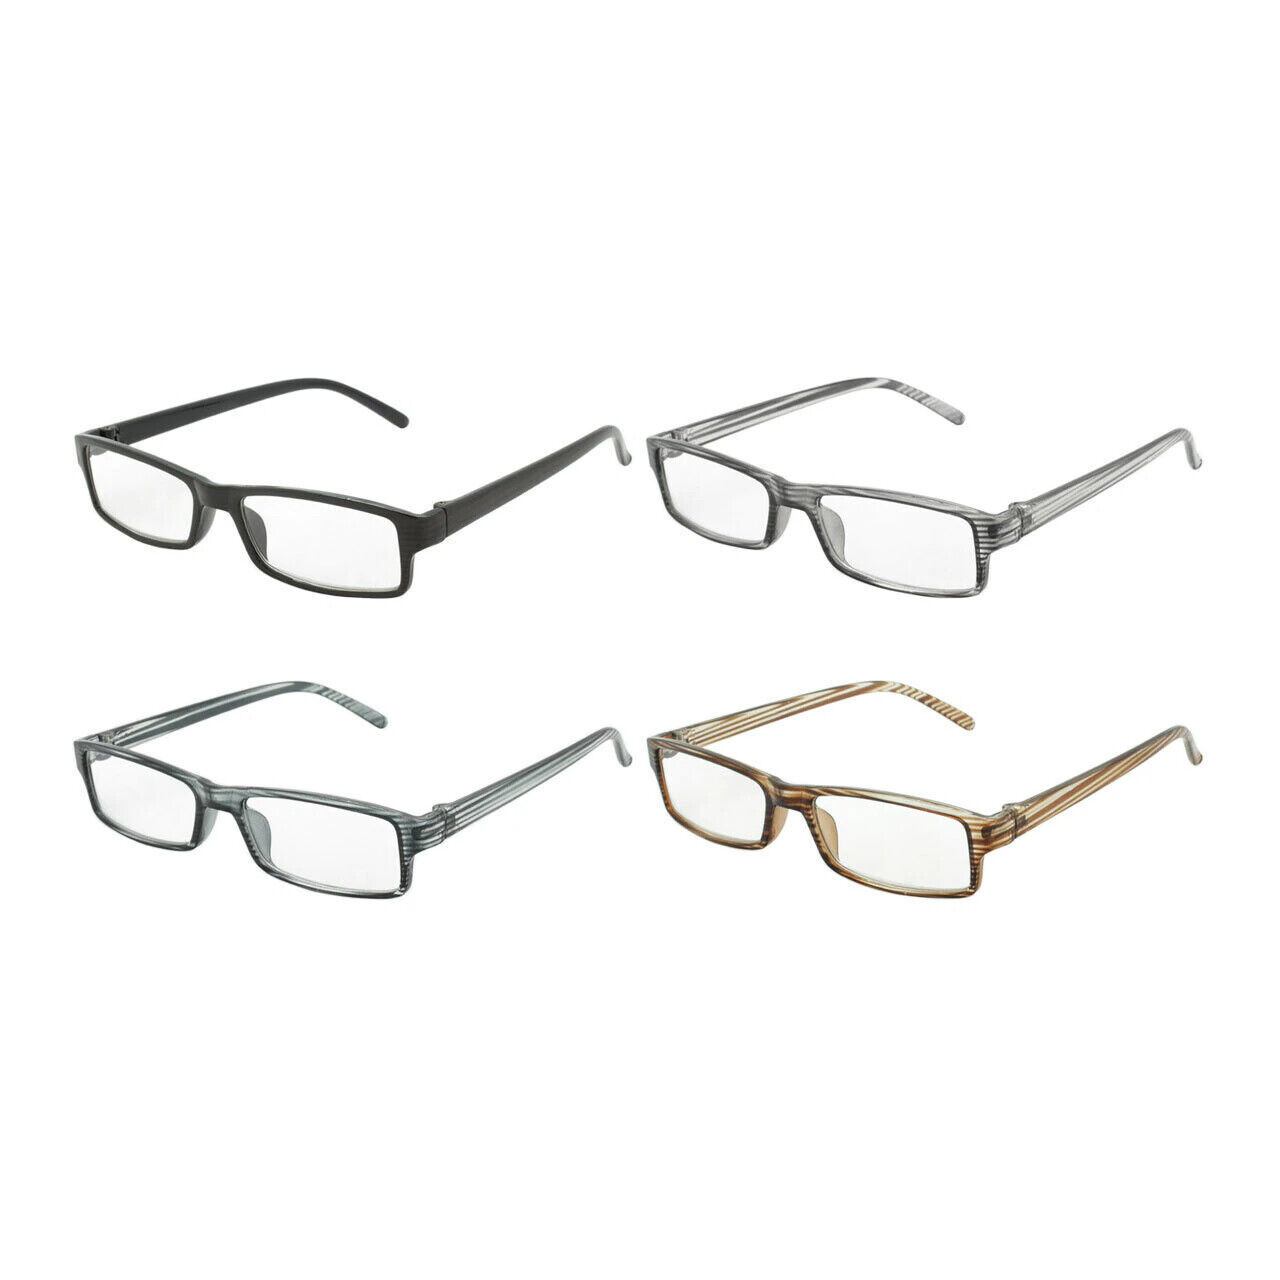 Primary image for Wholesale Lot of 12 Assorted Unisex Readers Spring Hinge Reading Glasses